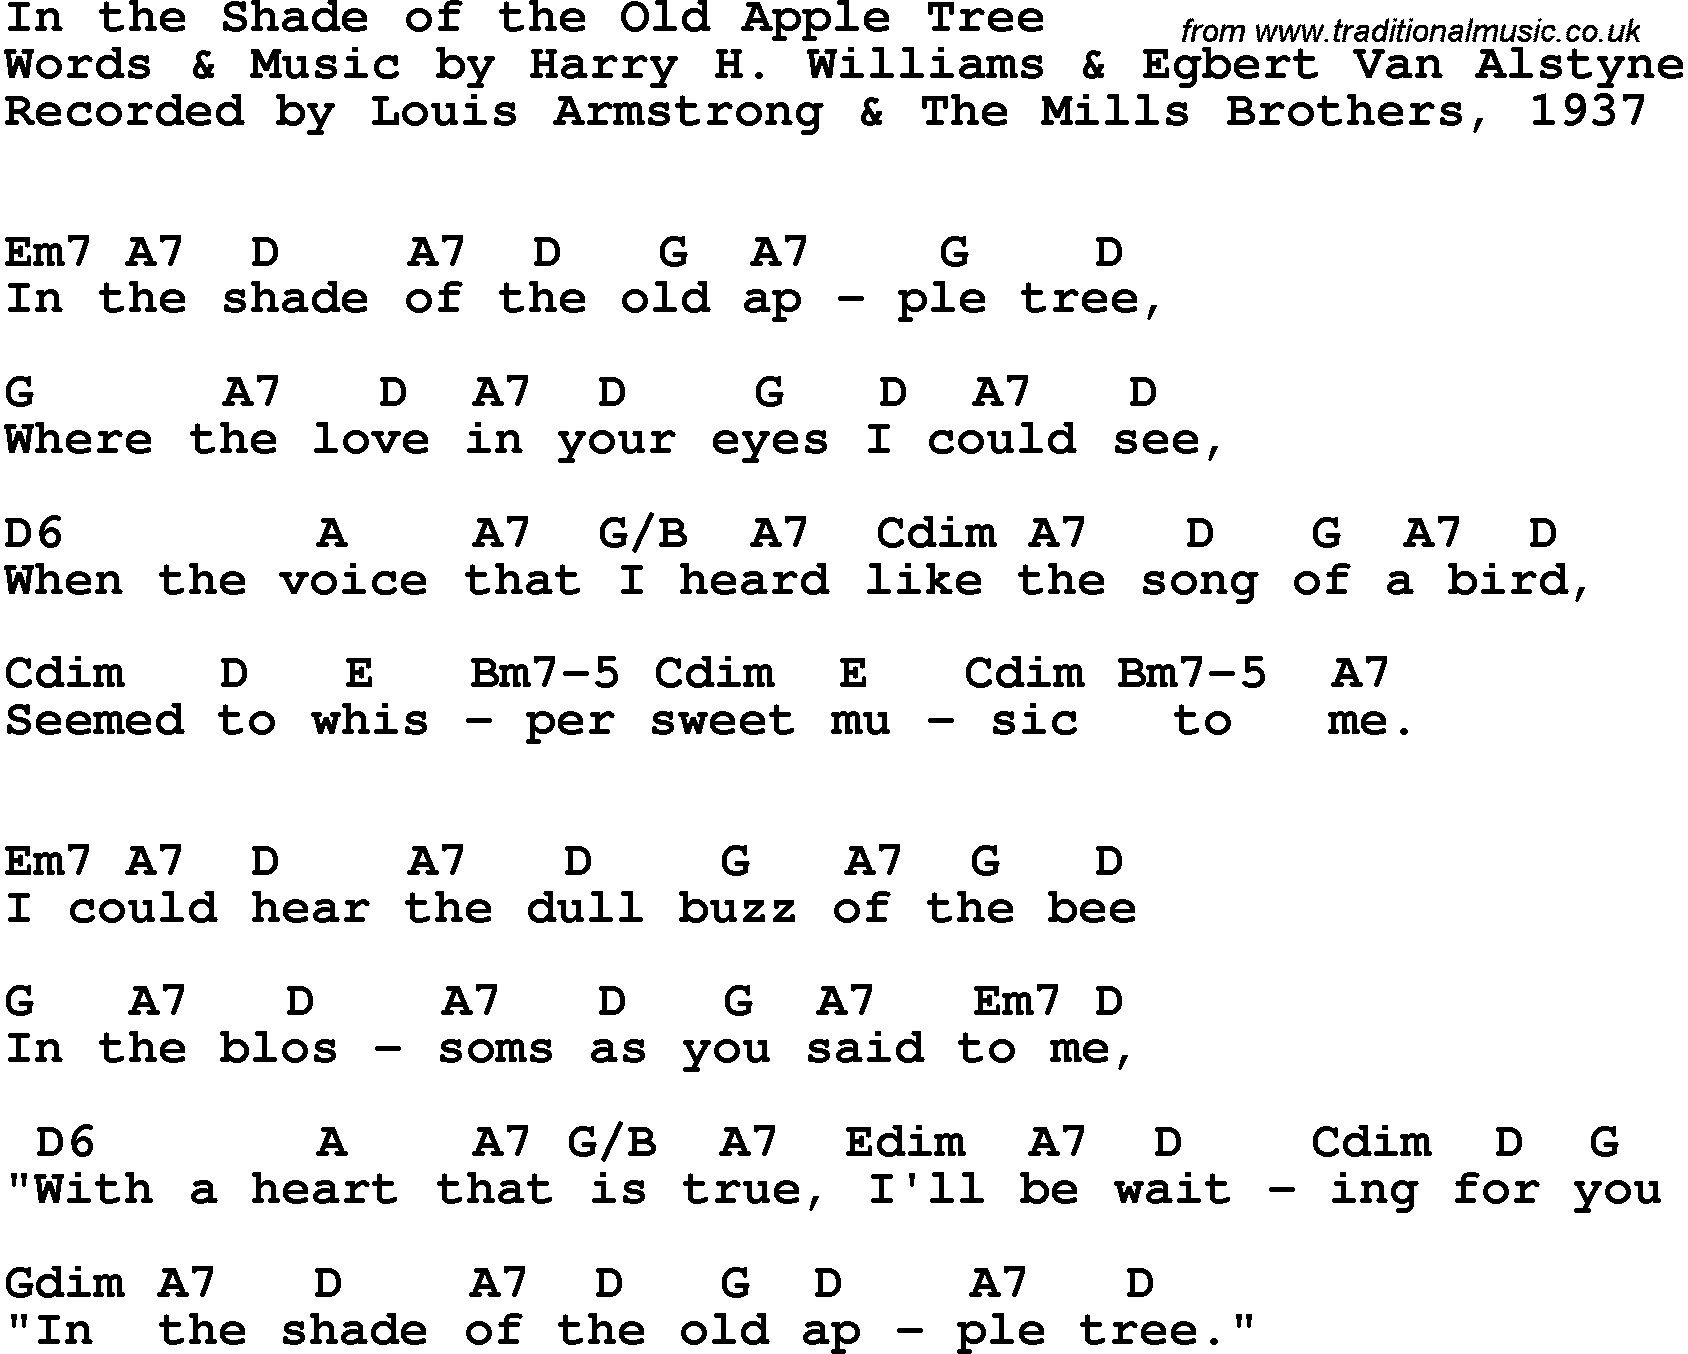 Song Lyrics with guitar chords for In The Shade Of The Old Apple Tree - The Mills Brothers & Louis Armstrong, 1937